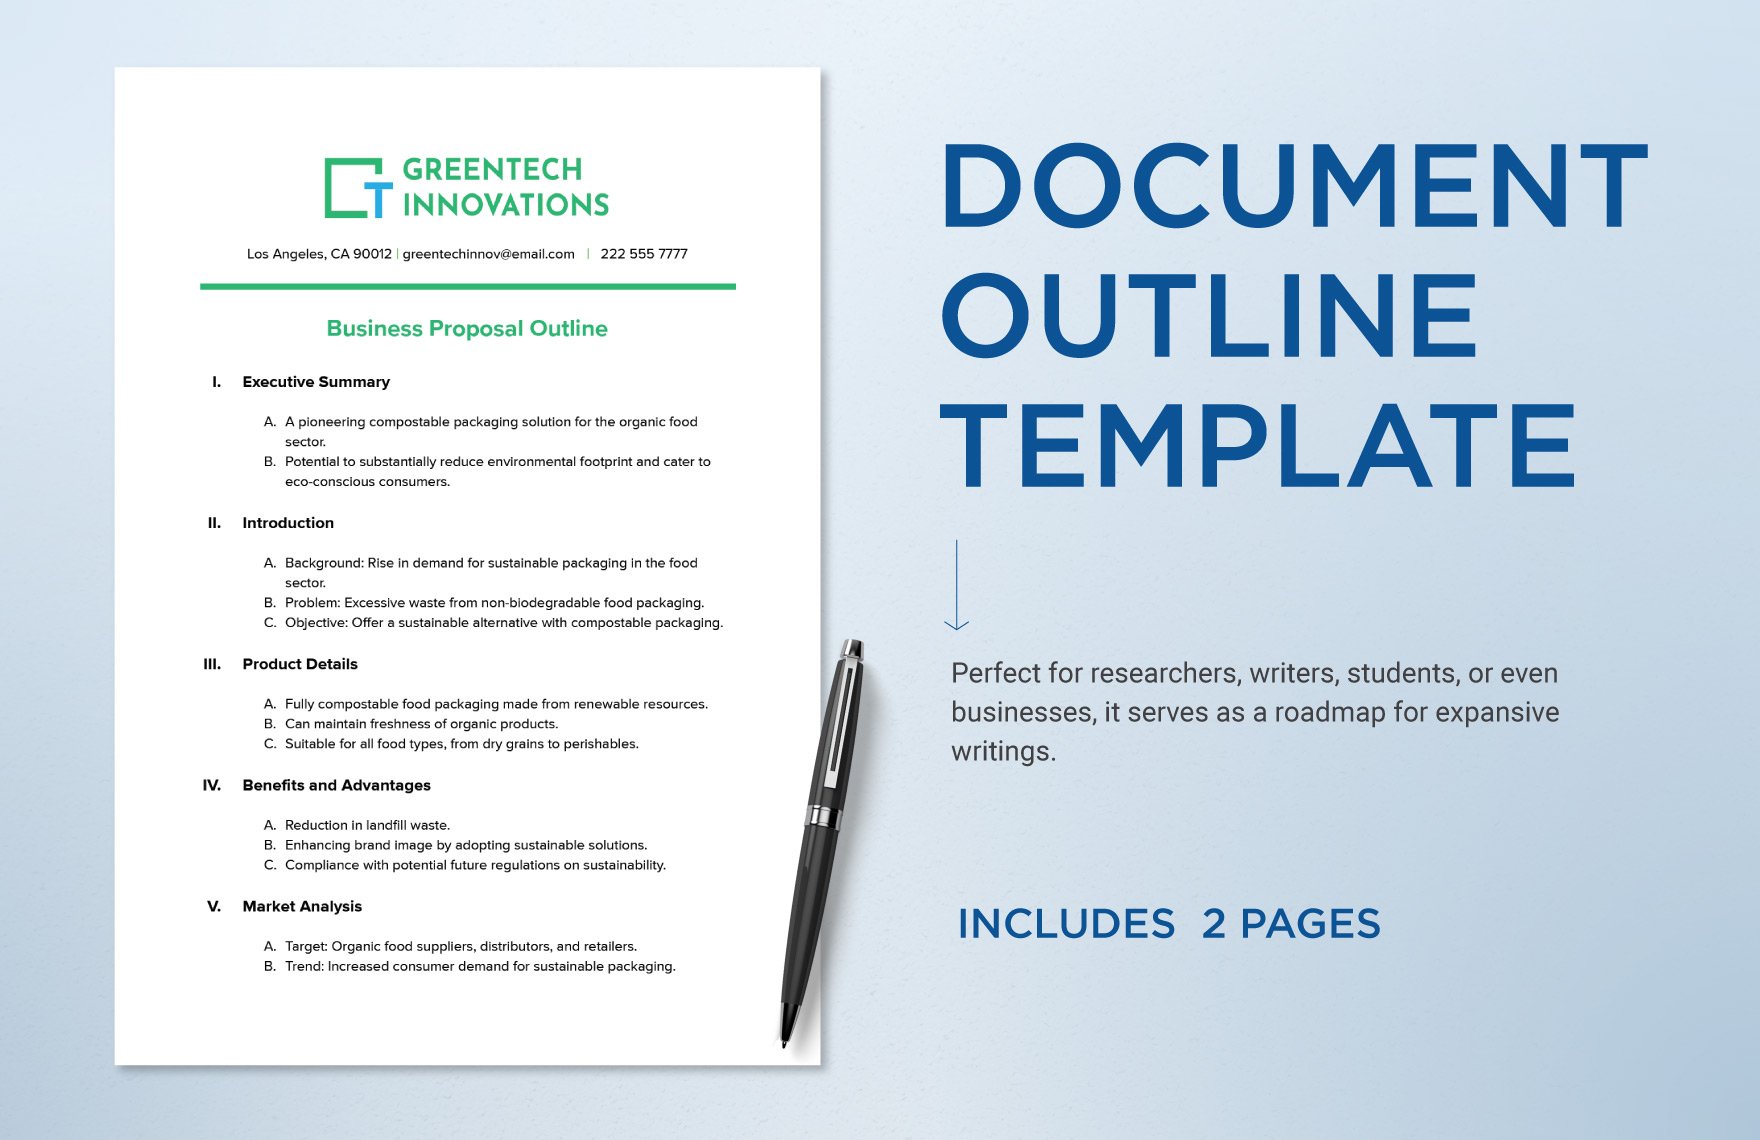 Document Outline Template